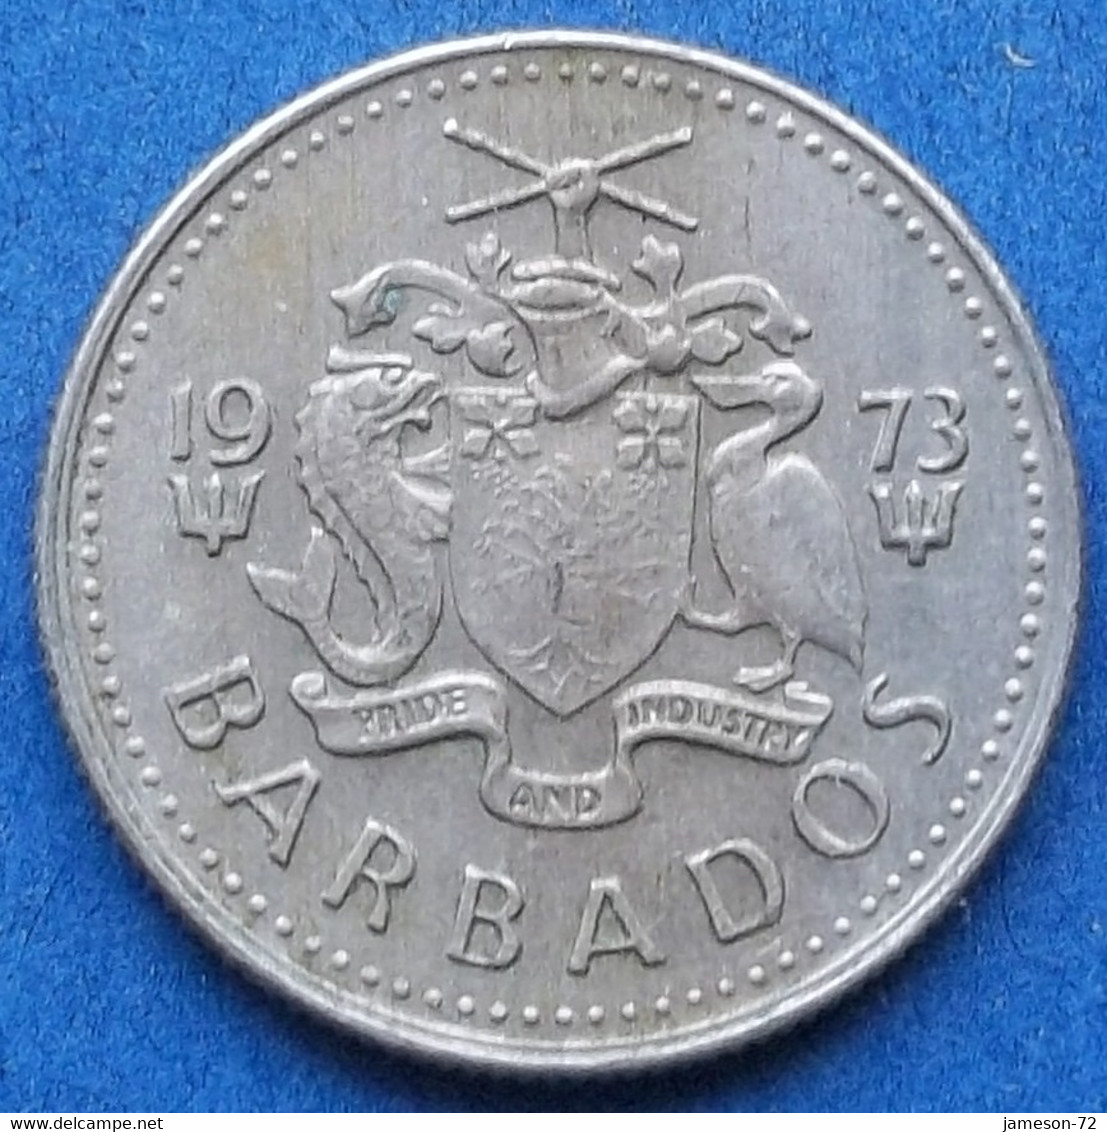 BARBADOS - 10 Cents 1973 "tern" KM# 12 Member Of The Commonwealth, Independent Republic (1966) - Edelweiss Coins - Barbados